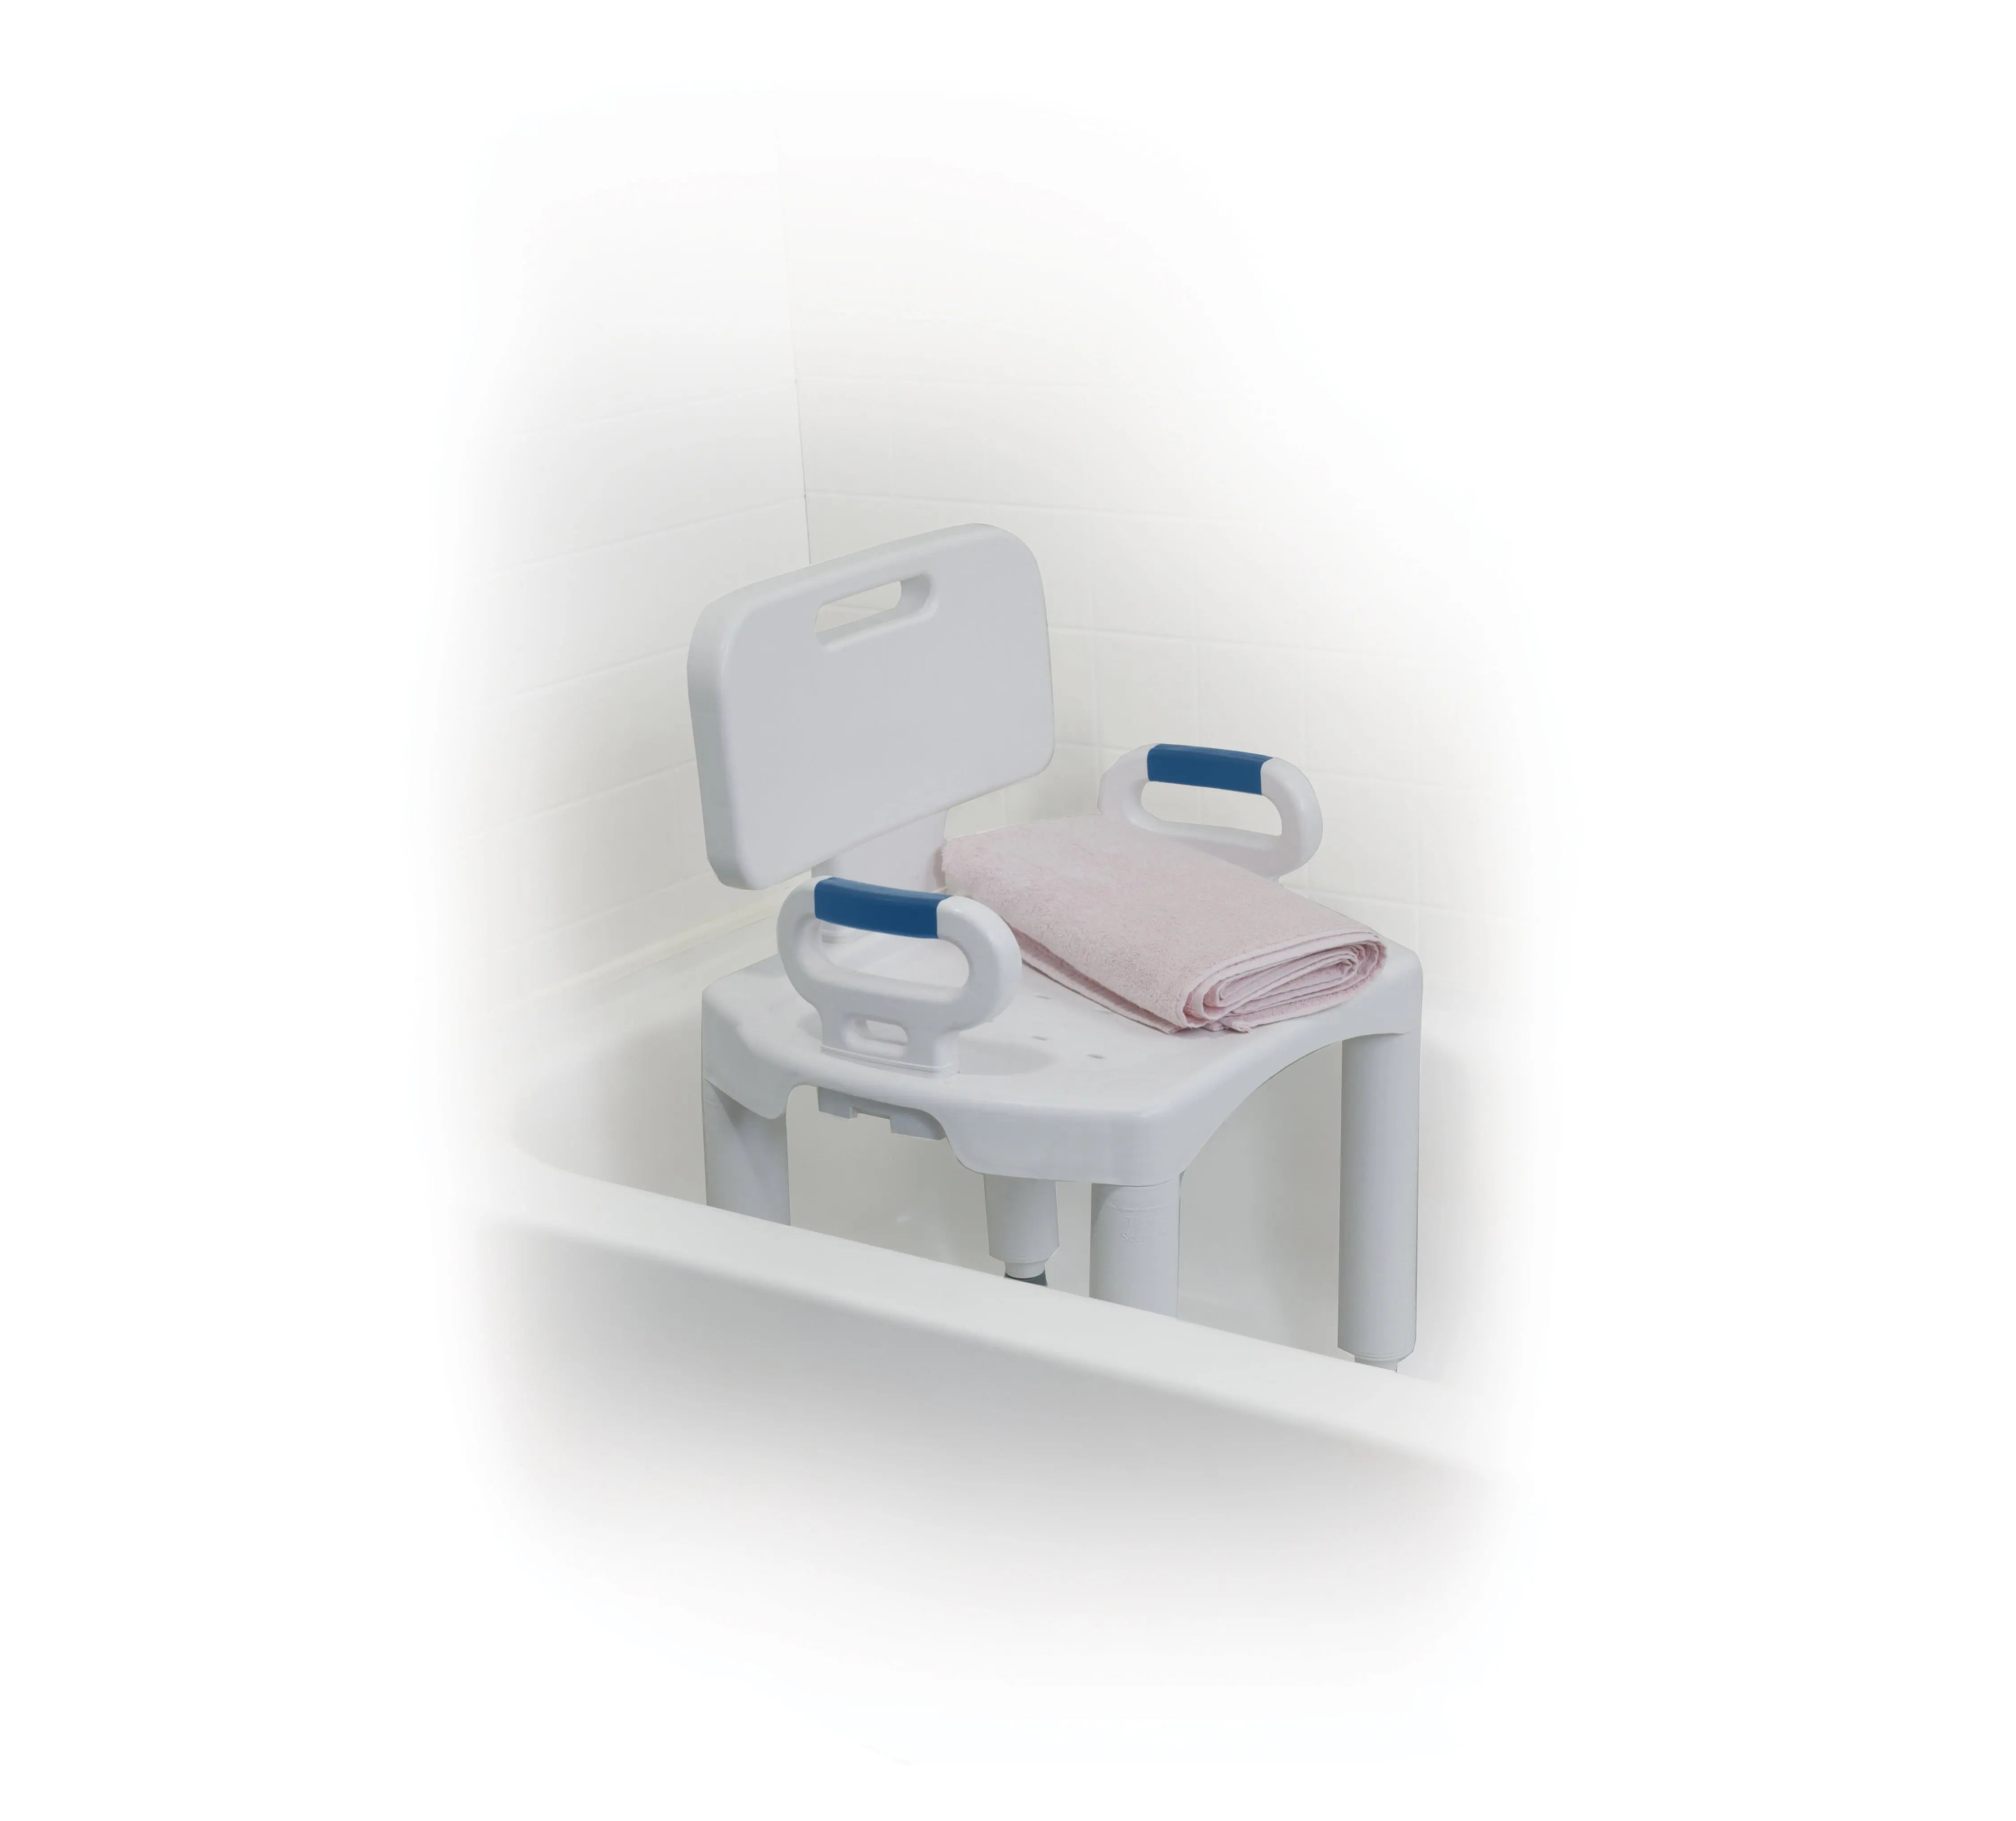 Premium Series Shower Chair with Back and Arms - Home Health Store Inc